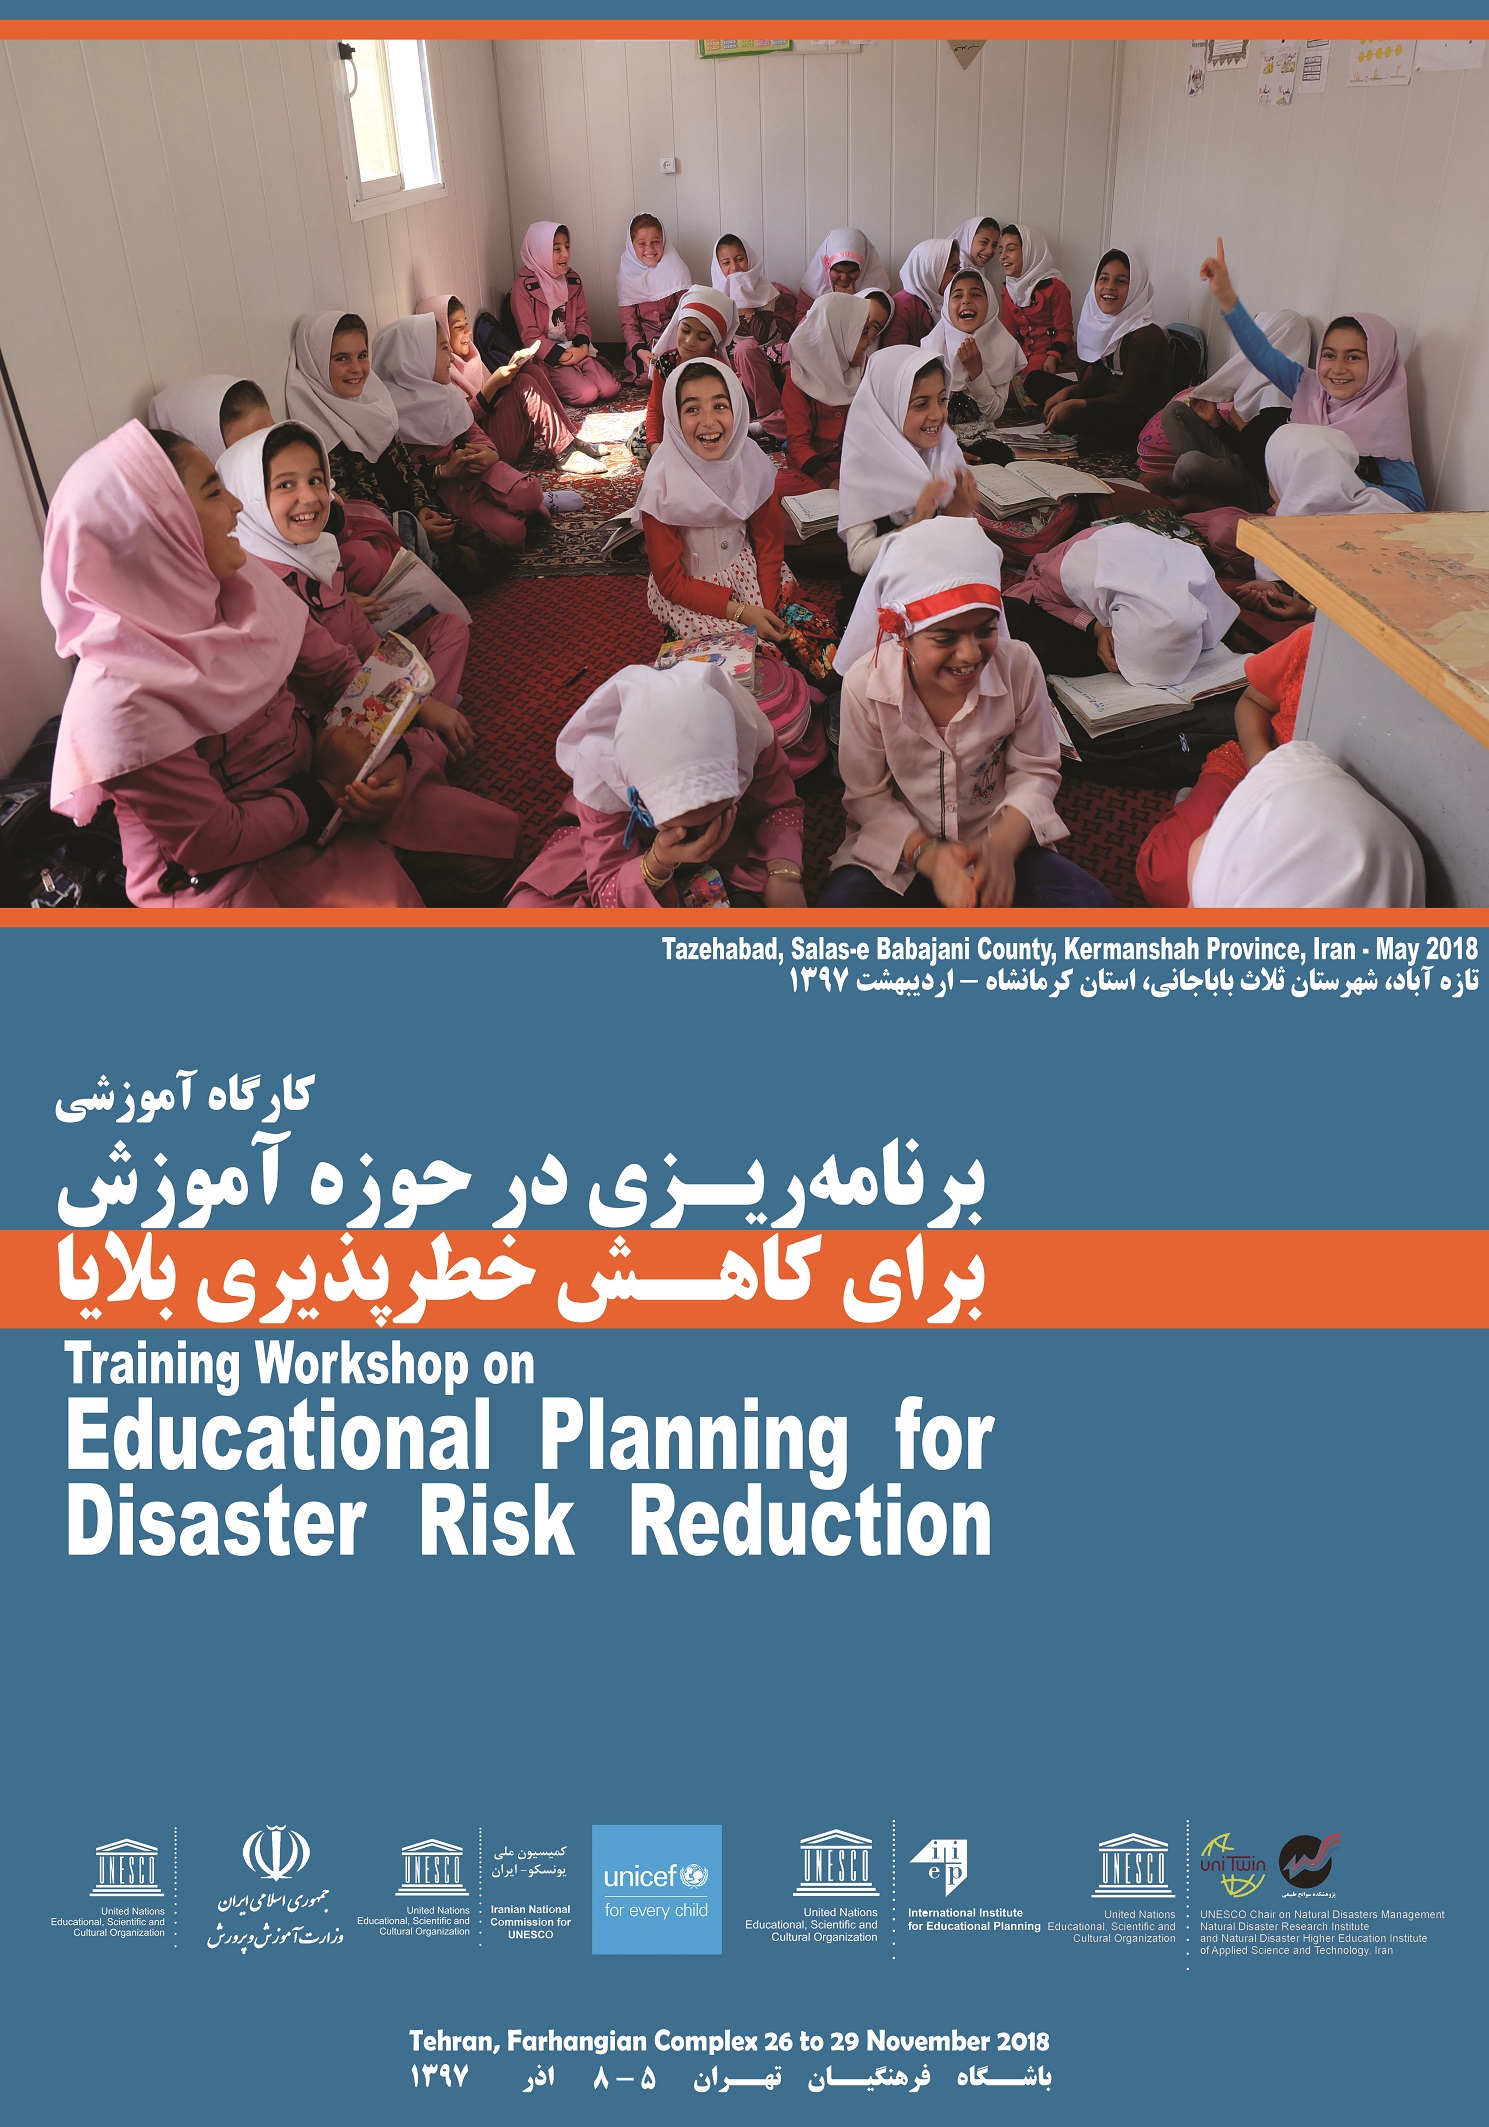 unesco-and-unicef-co-organize-a-4-day-training-workshop-on-educational-planning-for-disaster-risk-reduction-tehran-26-to-29-november-2018